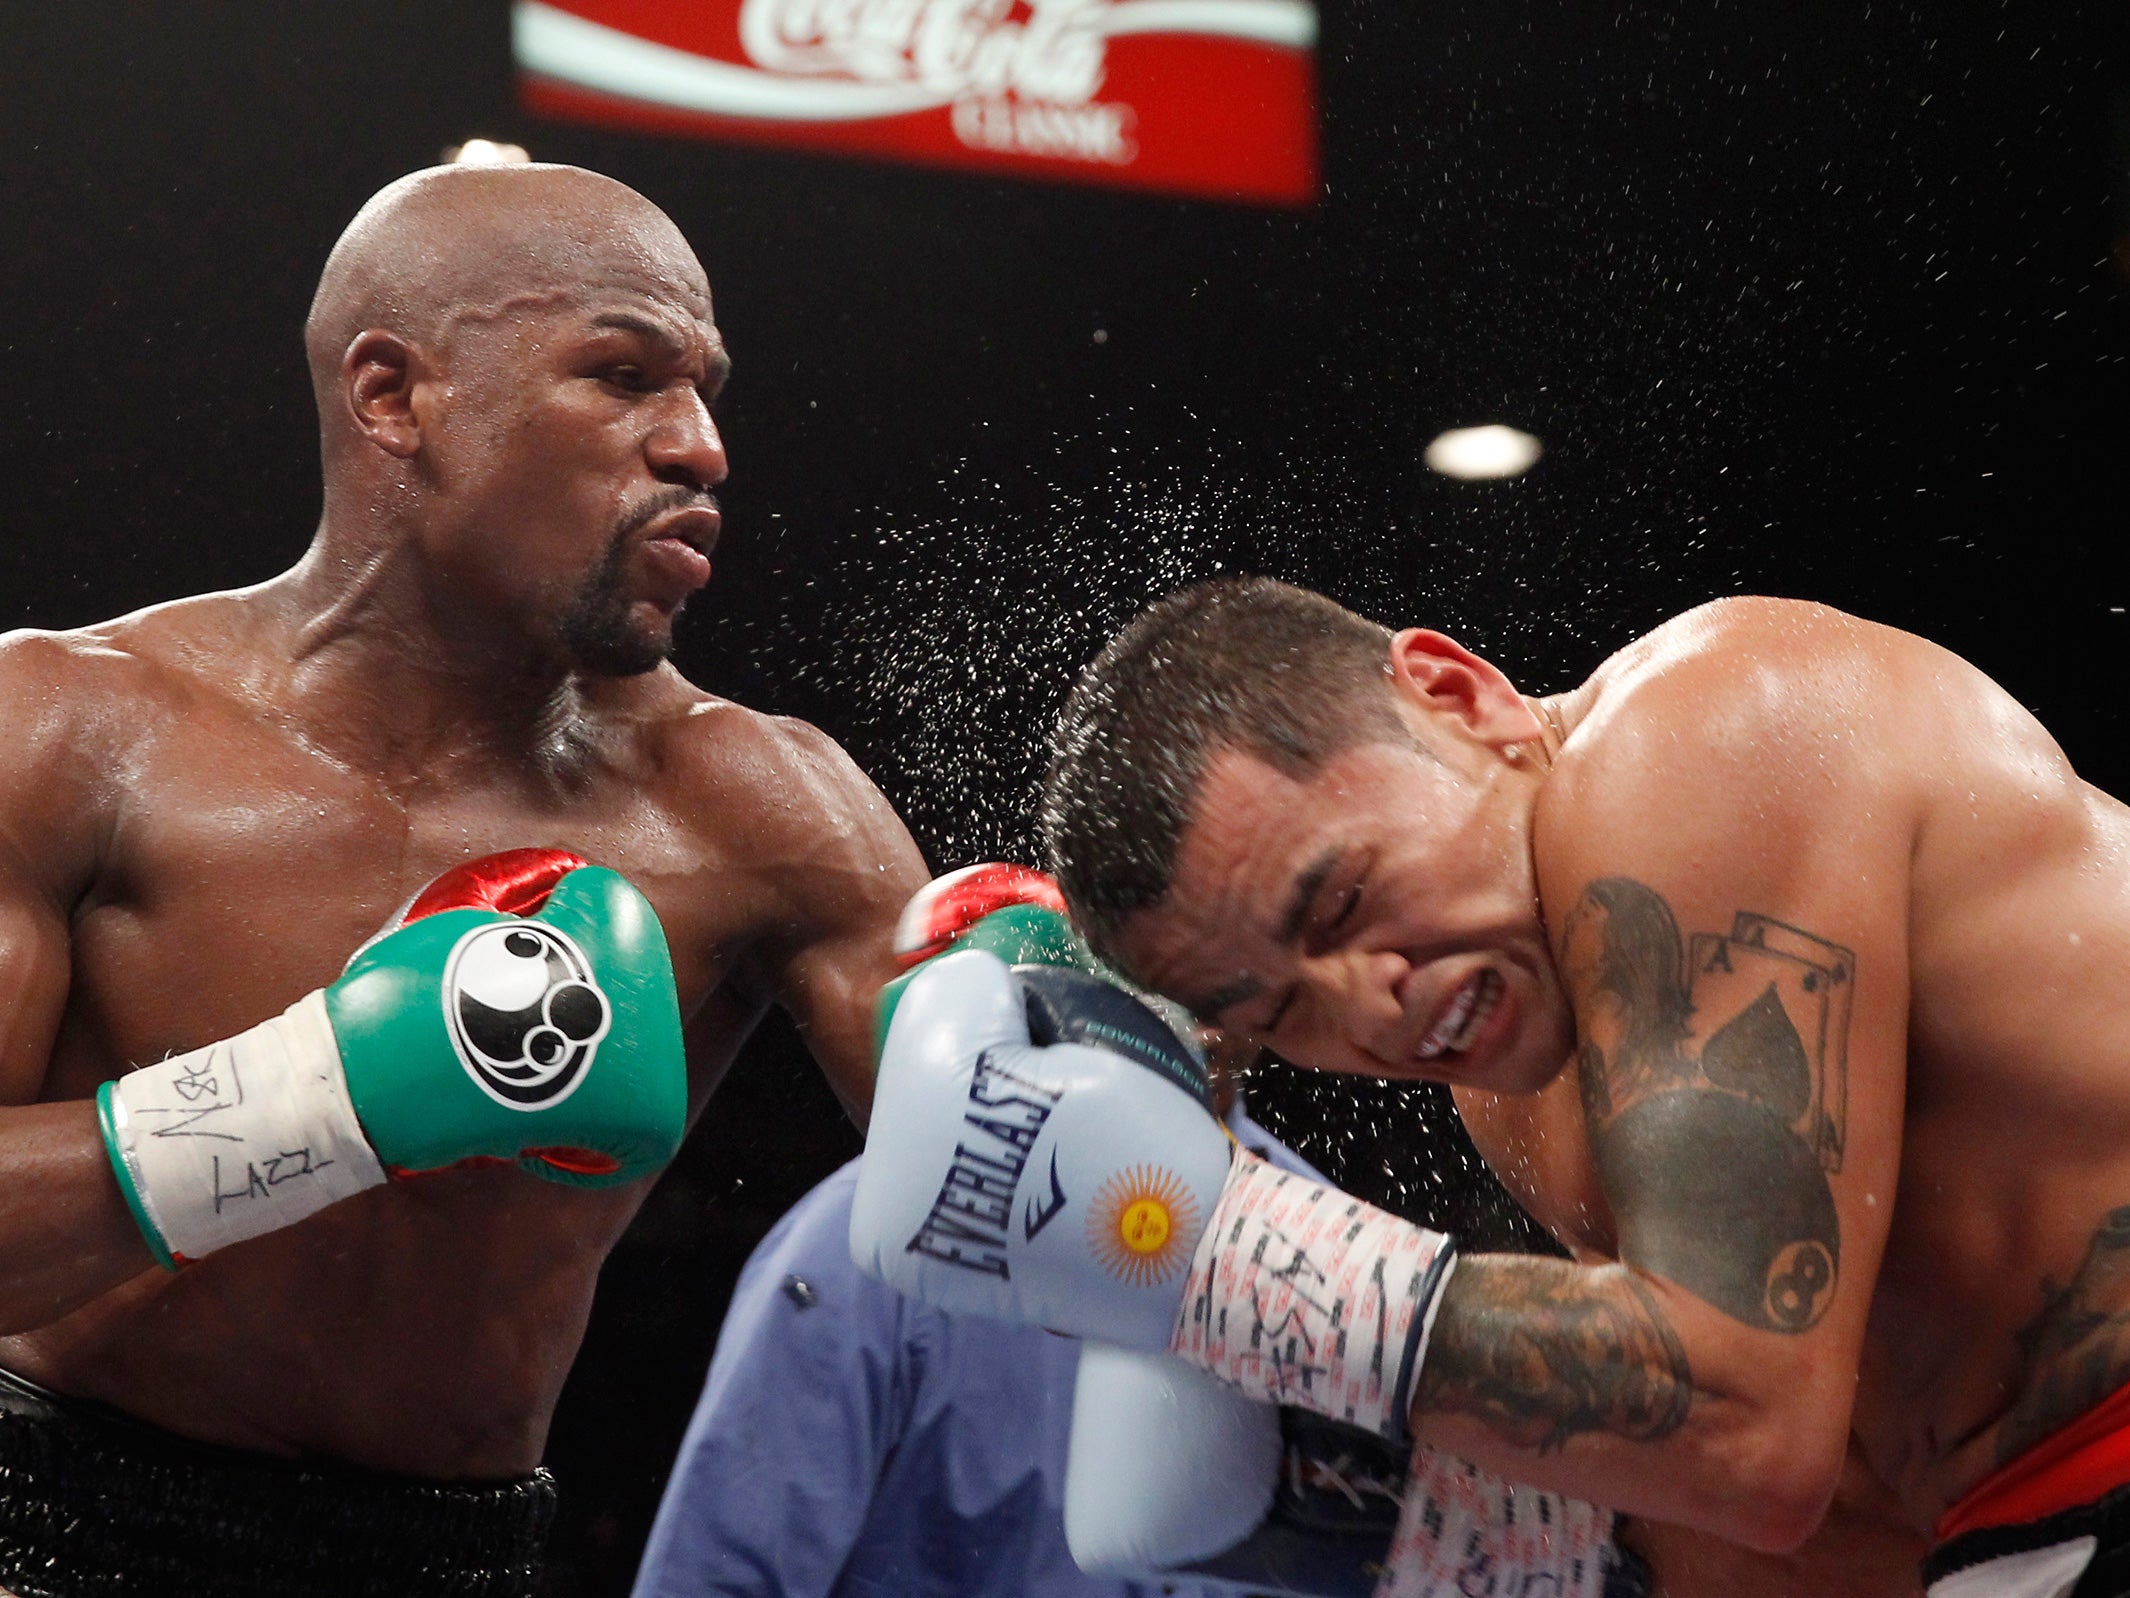 Welterweight champion Floyd Mayweather of the U.S. connects on Marcos Maidana of Argentina during their title fight at the MGM Grand Garden Arena in Las Vegas, Nevada